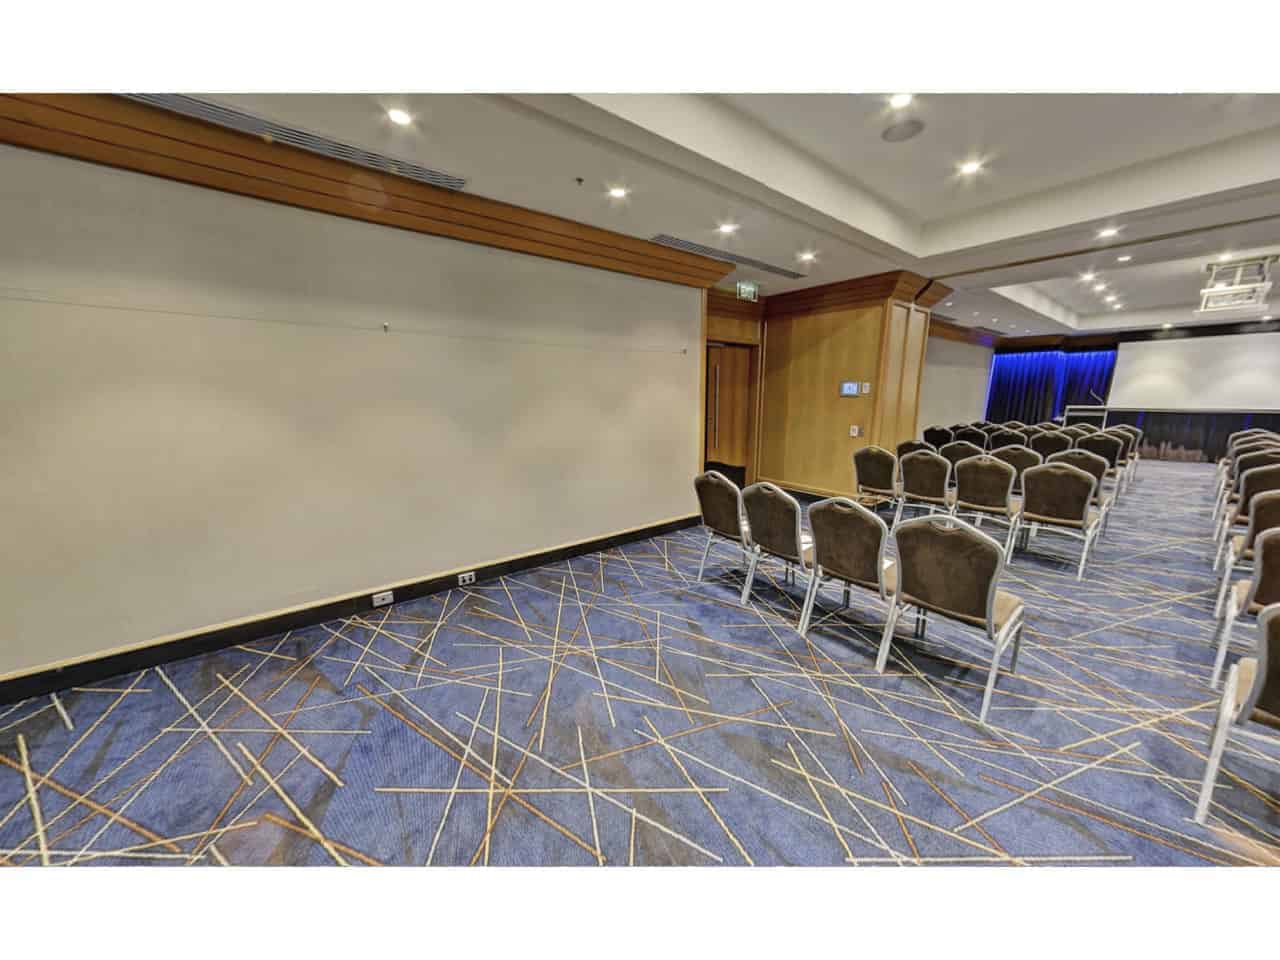 Large conference space